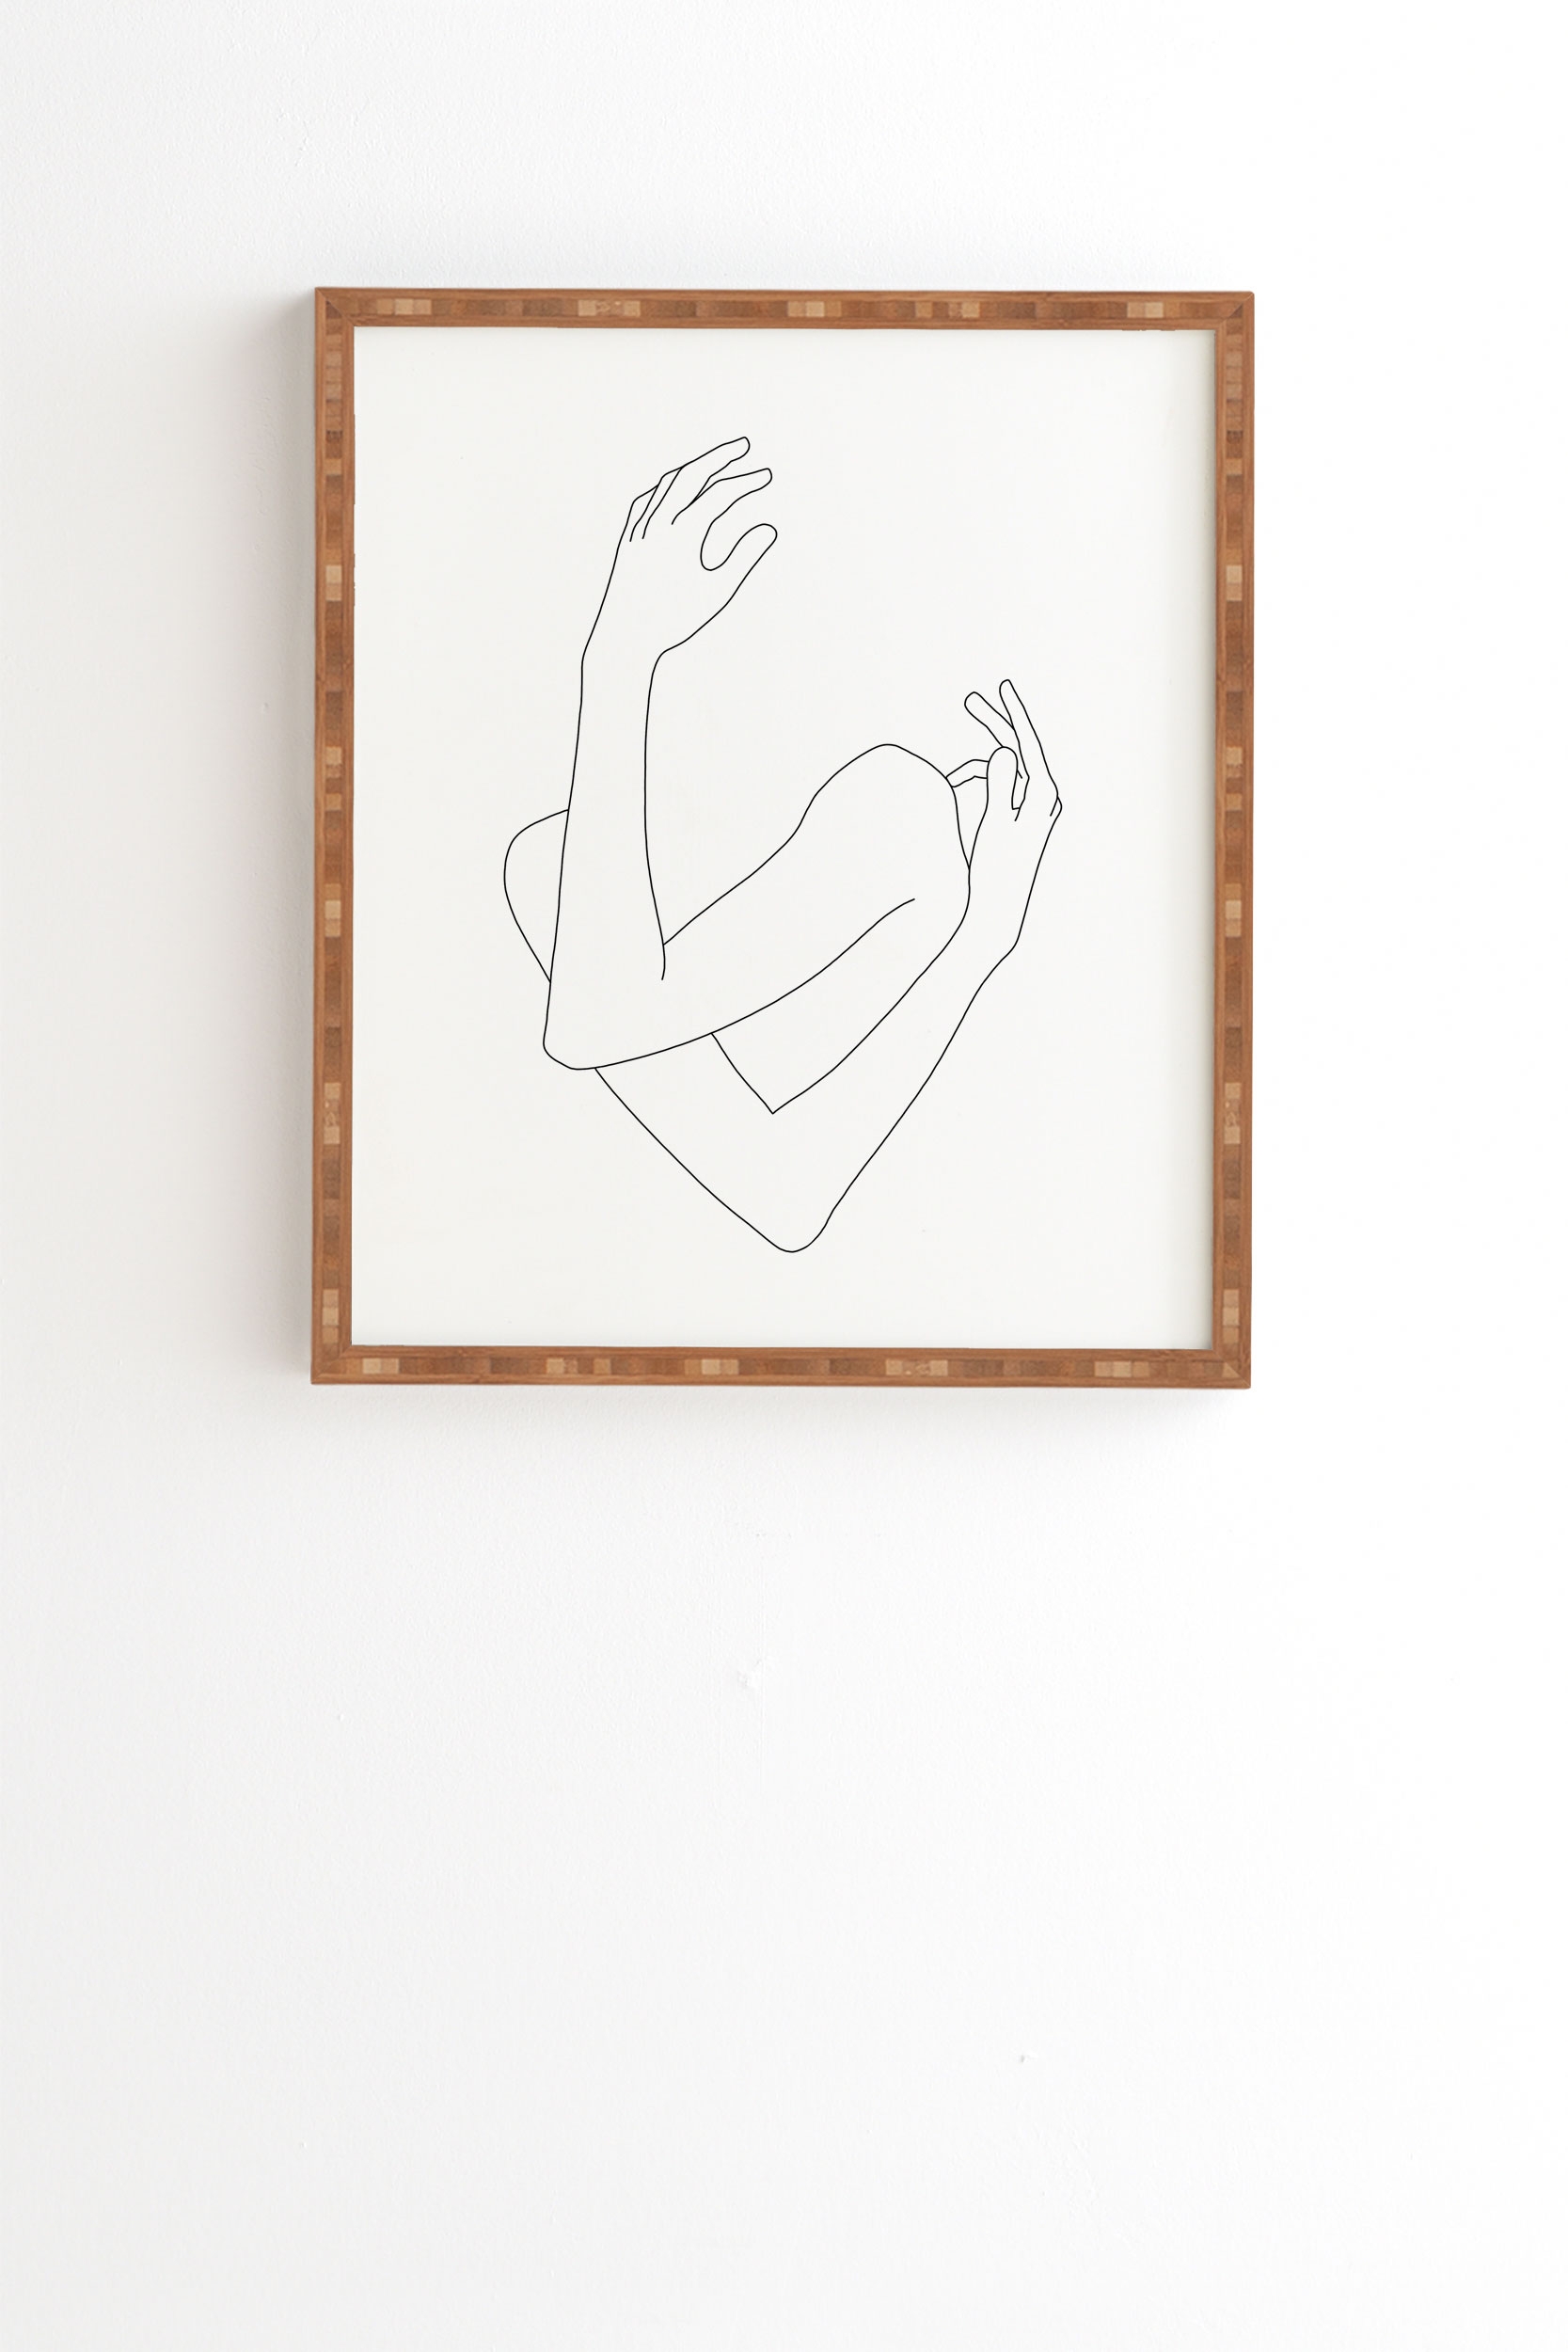 Crossed Arms Illustration Jill by The Colour Study - Framed Wall Art Bamboo 11" x 13" - Image 0